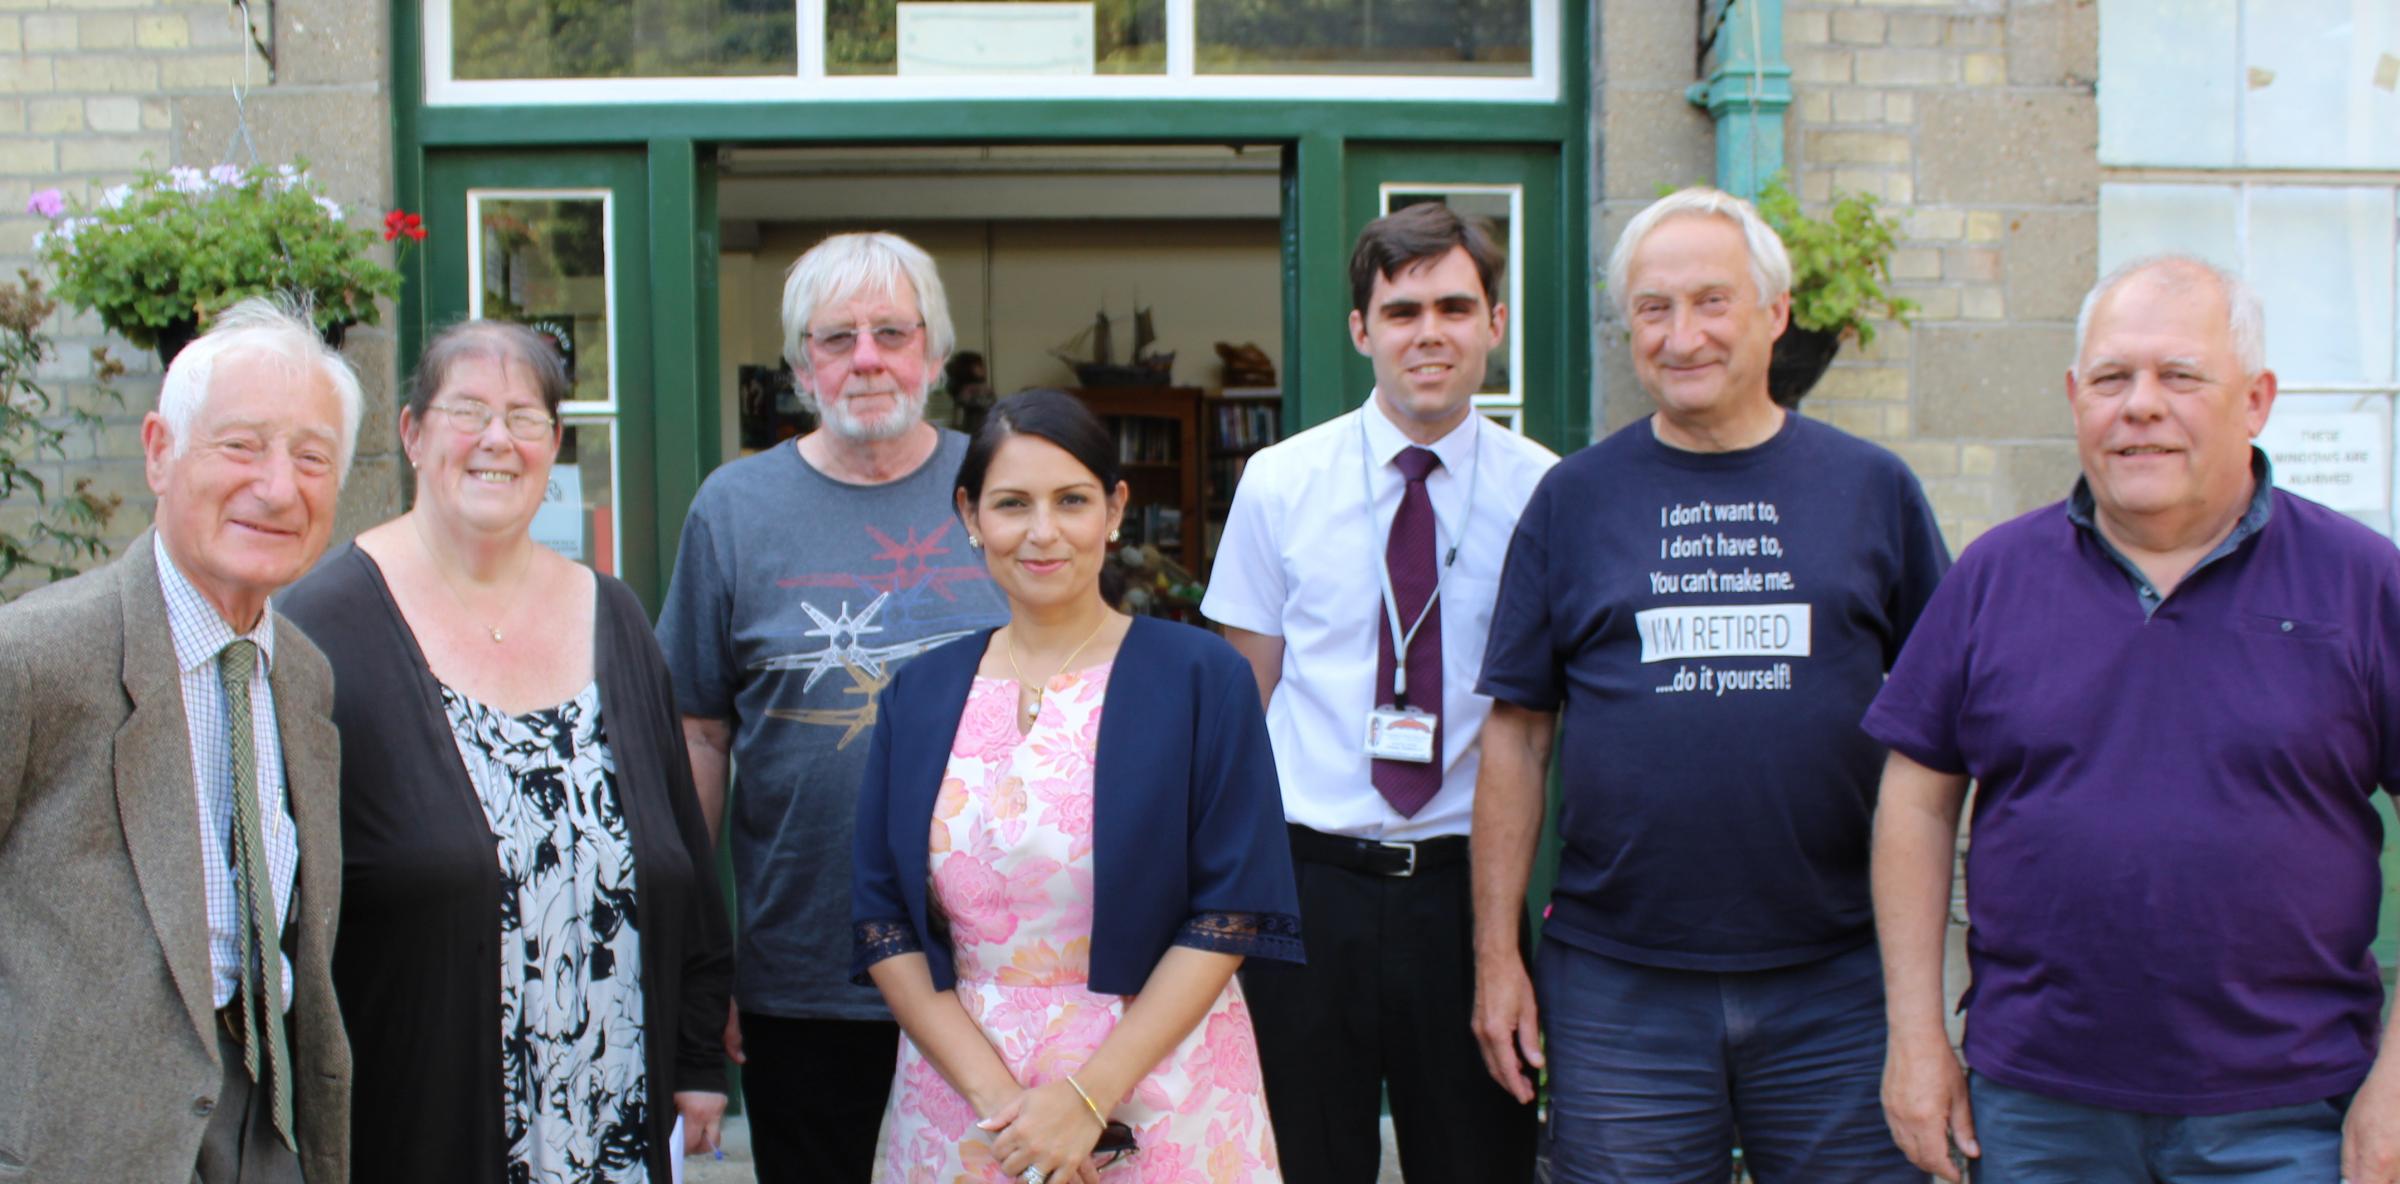 MUSEUM SUPPORTER: Priti Patel’s last visit to the Museum of Power in August 2019 